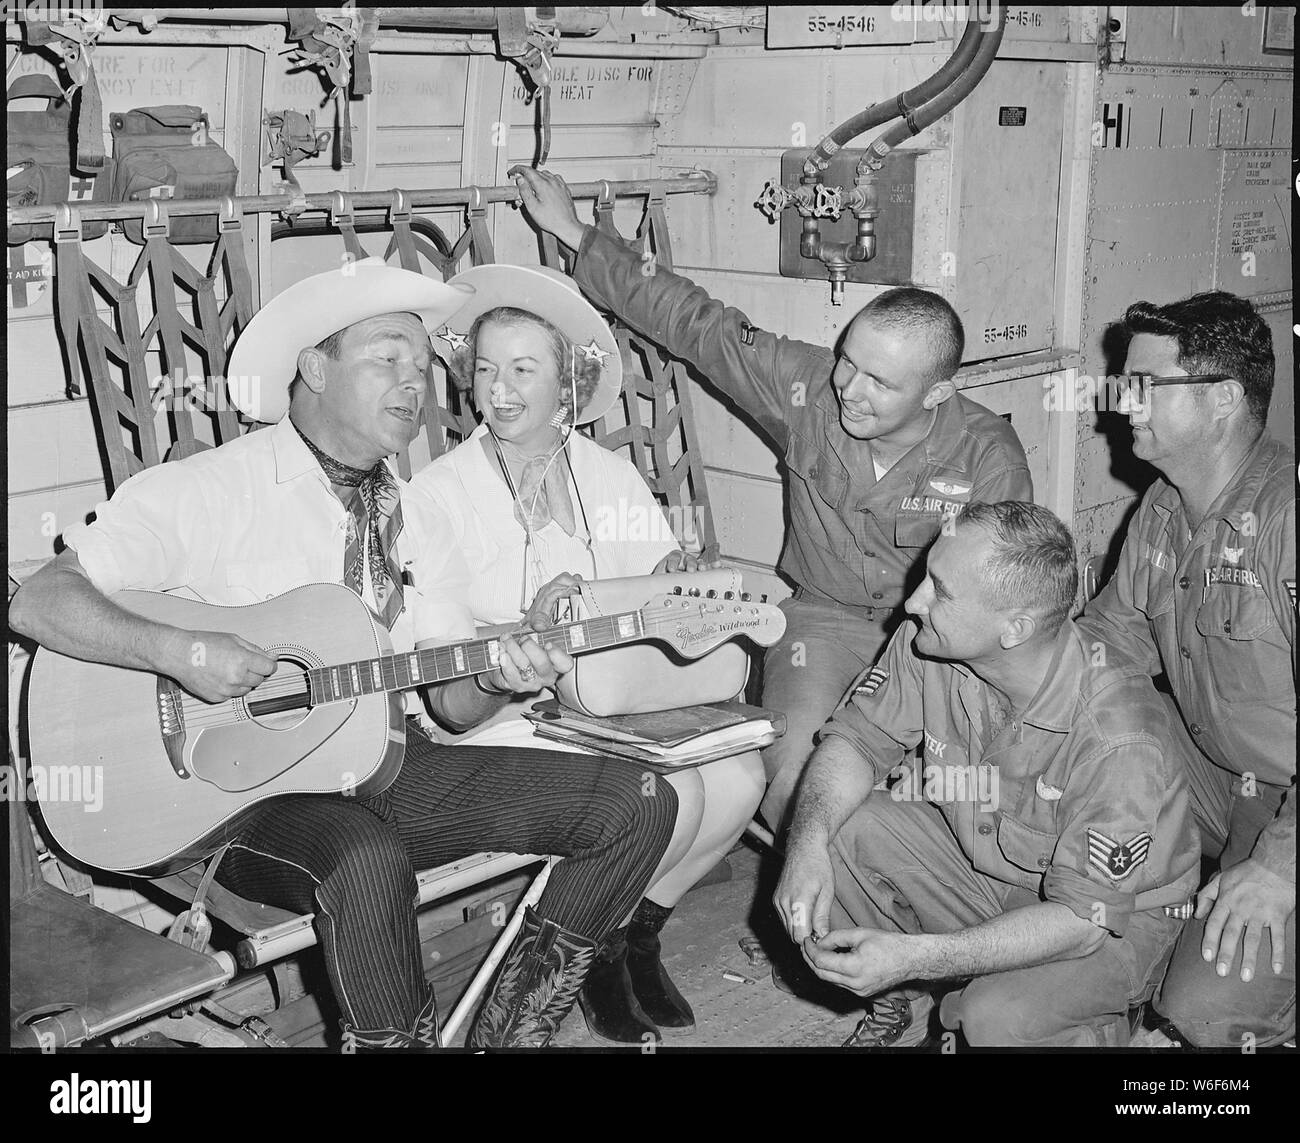 Air Borne Sing-A-Long. Roy and Dale Rogers entertain crew members of an Air Force C-123 Provider during the last leg of their Vietnam tour. Crew members are (left to right) Airman Second Class Cyril F. Crawly, 22, of Centerdale, RI, Staff Sergeant Francis K. Sutek, 35, of Fort Walton Beach, FL, and Technical Sergeant Eddie Miller, 36, of Rienzi, MS. Stock Photo